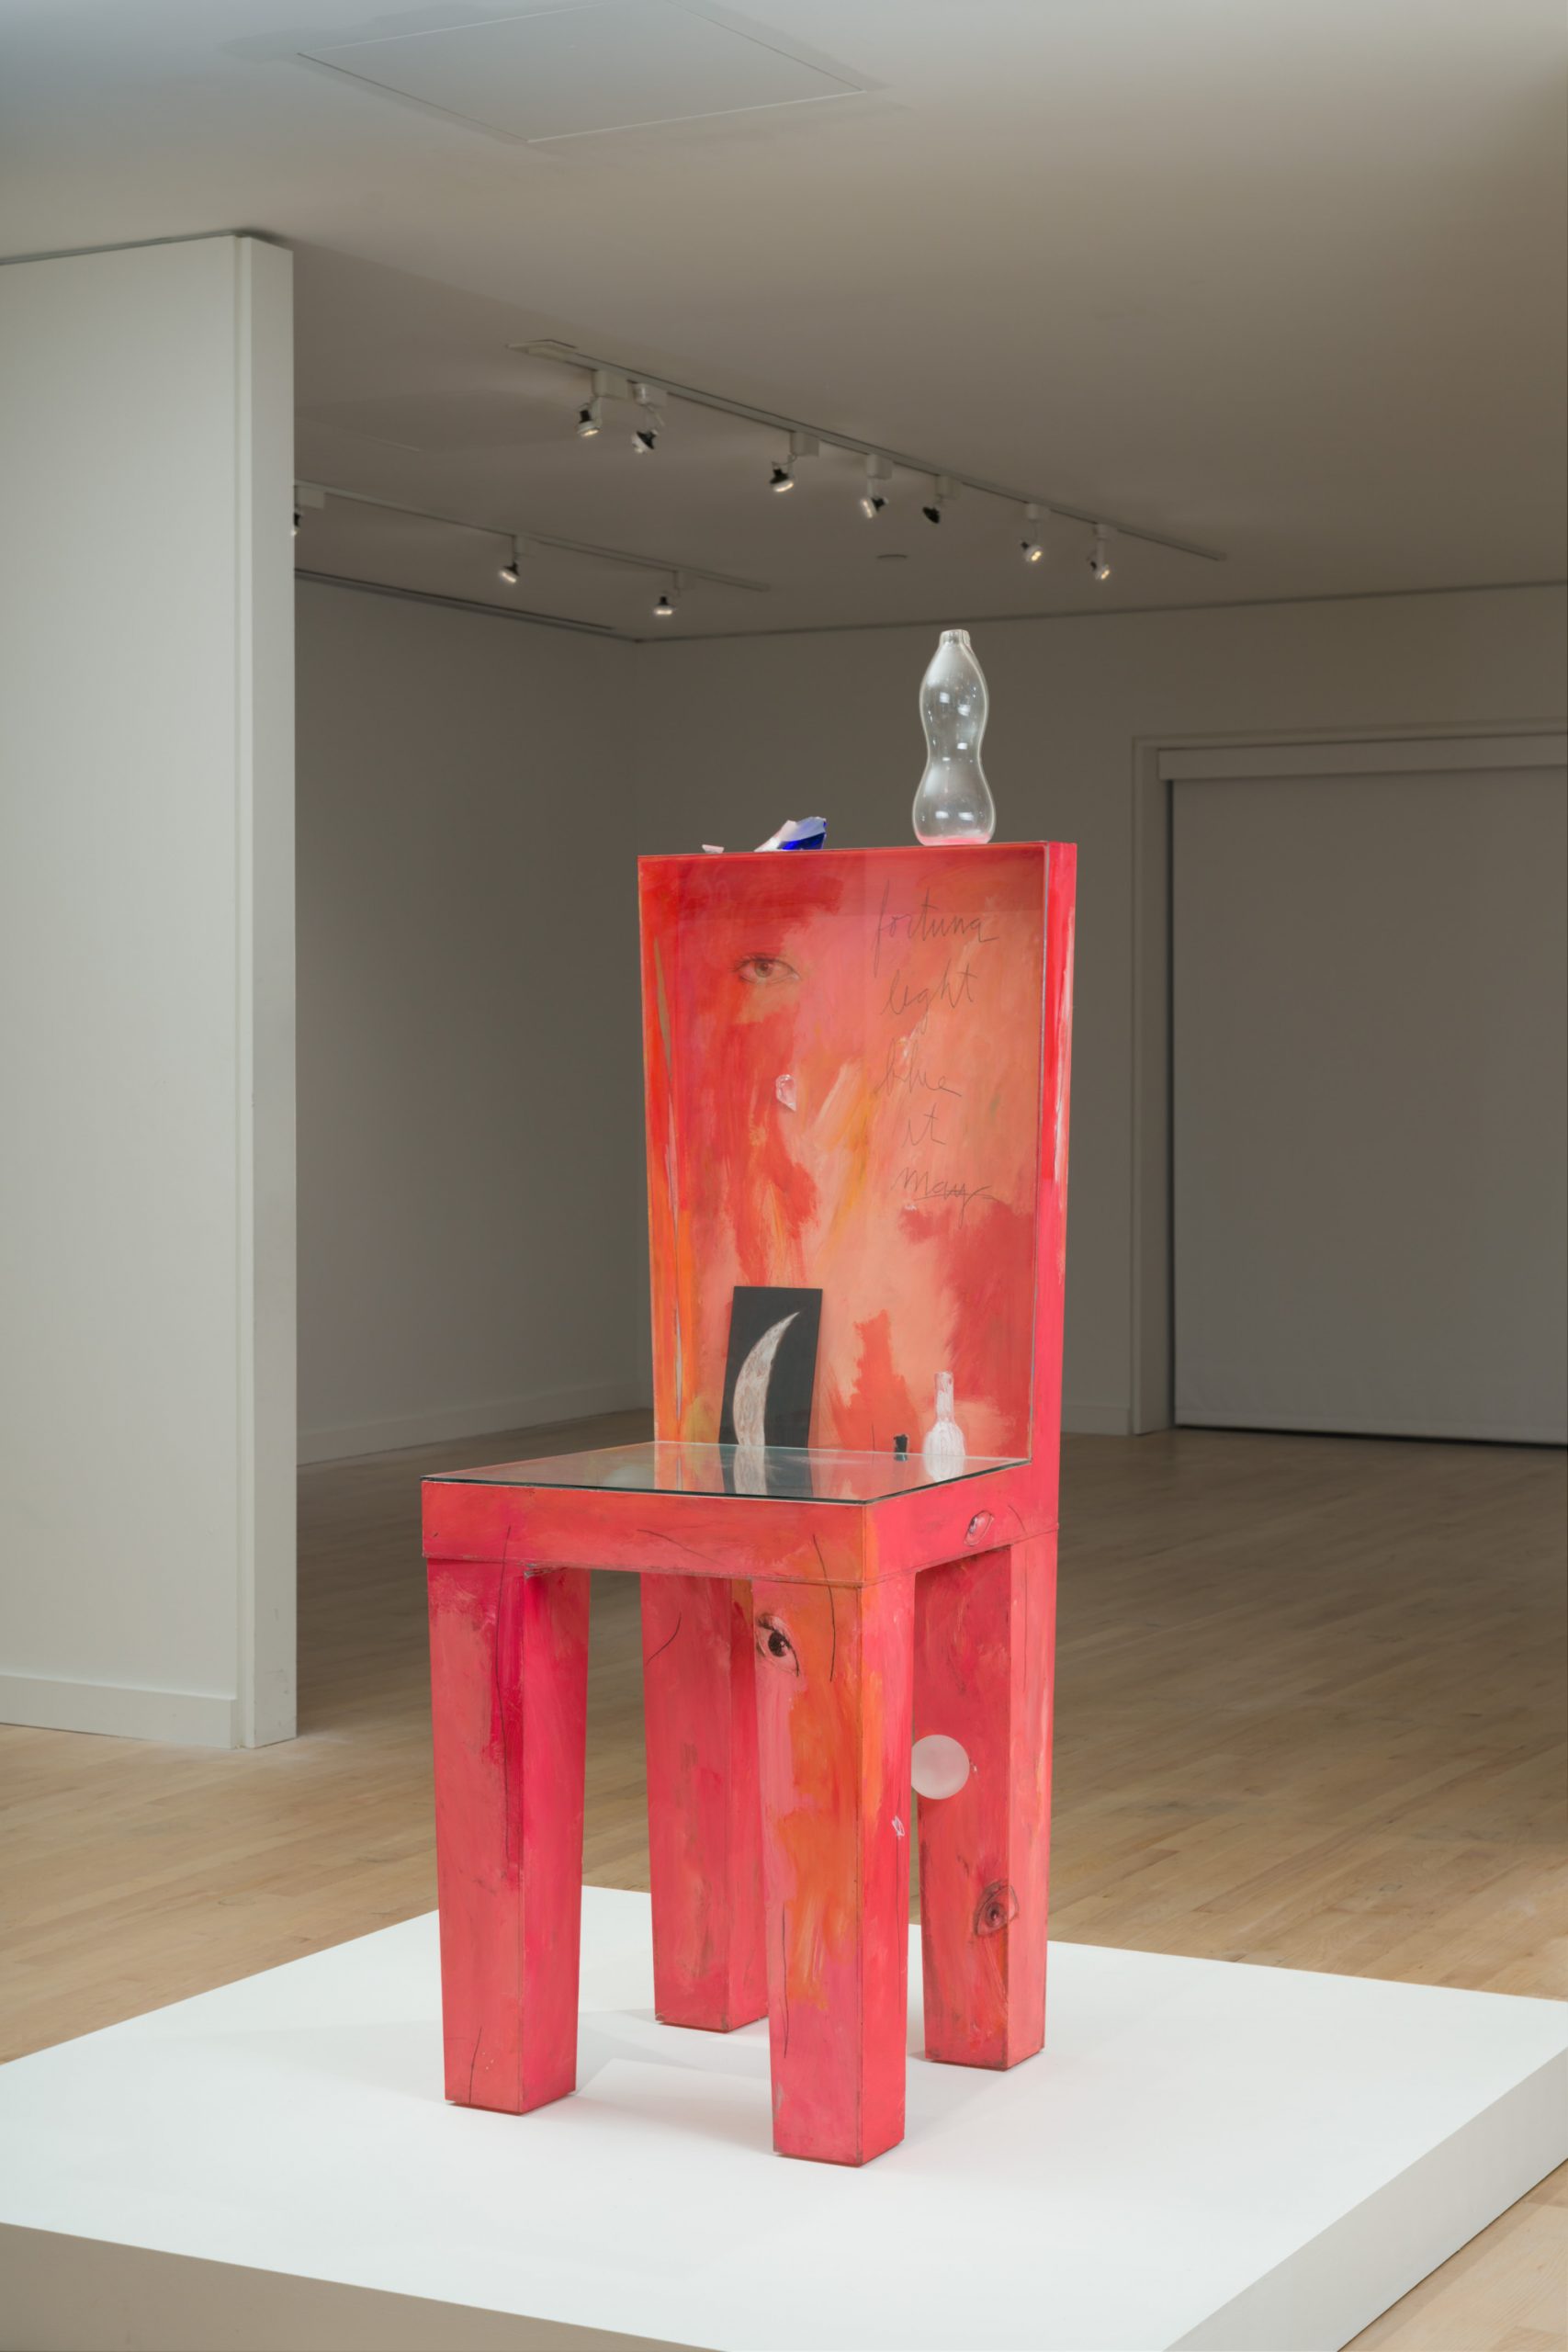 Image of artwork Red Chair by Therman Statom